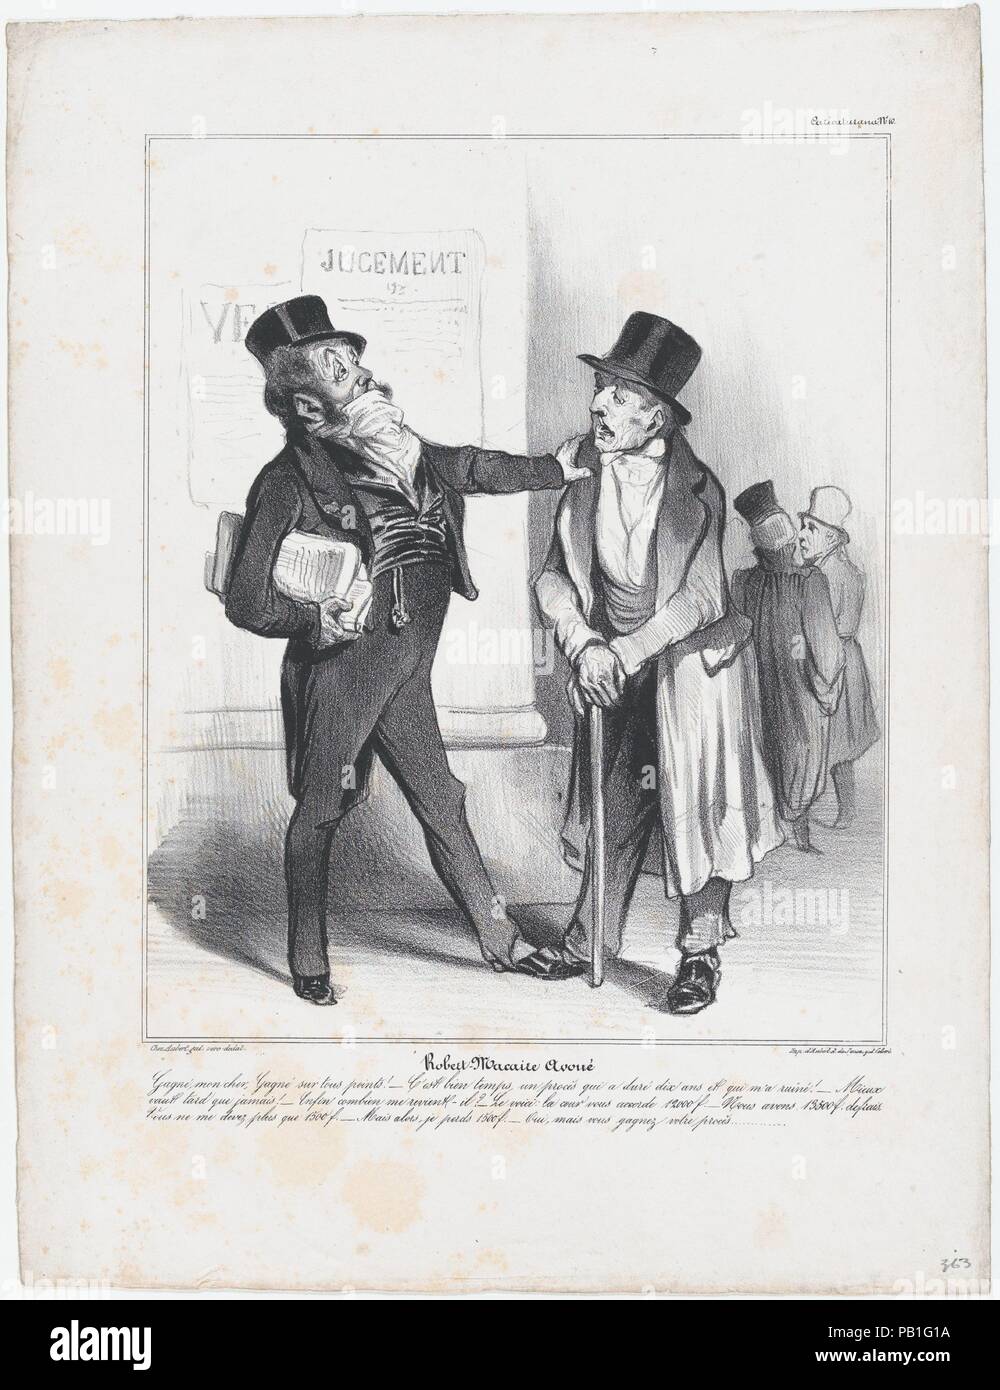 Plate 10: Robert Macaire, solicitor, from 'Caricaturana,' published in Les Robert Macaires. Artist: Honoré Daumier (French, Marseilles 1808-1879 Valmondois). Author: Charles Philipon (French, Lyons 1800-1862 Paris). Dimensions: Image: 10 1/4 × 8 3/8 in. (26 × 21.2 cm)  Sheet: 14 1/2 in. × 11 in. (36.9 × 28 cm). Printer: Aubert et Cie; Junca. Publisher: Aubert et Cie. Series/Portfolio: 'Caricaturana'. Date: 1838.  - Someone stole a thousand franc note from me, Monsieur.   - Very well! I have your case in hand, Madame. The thief is one of my friends.   - Then I would like to have my money back a Stock Photo